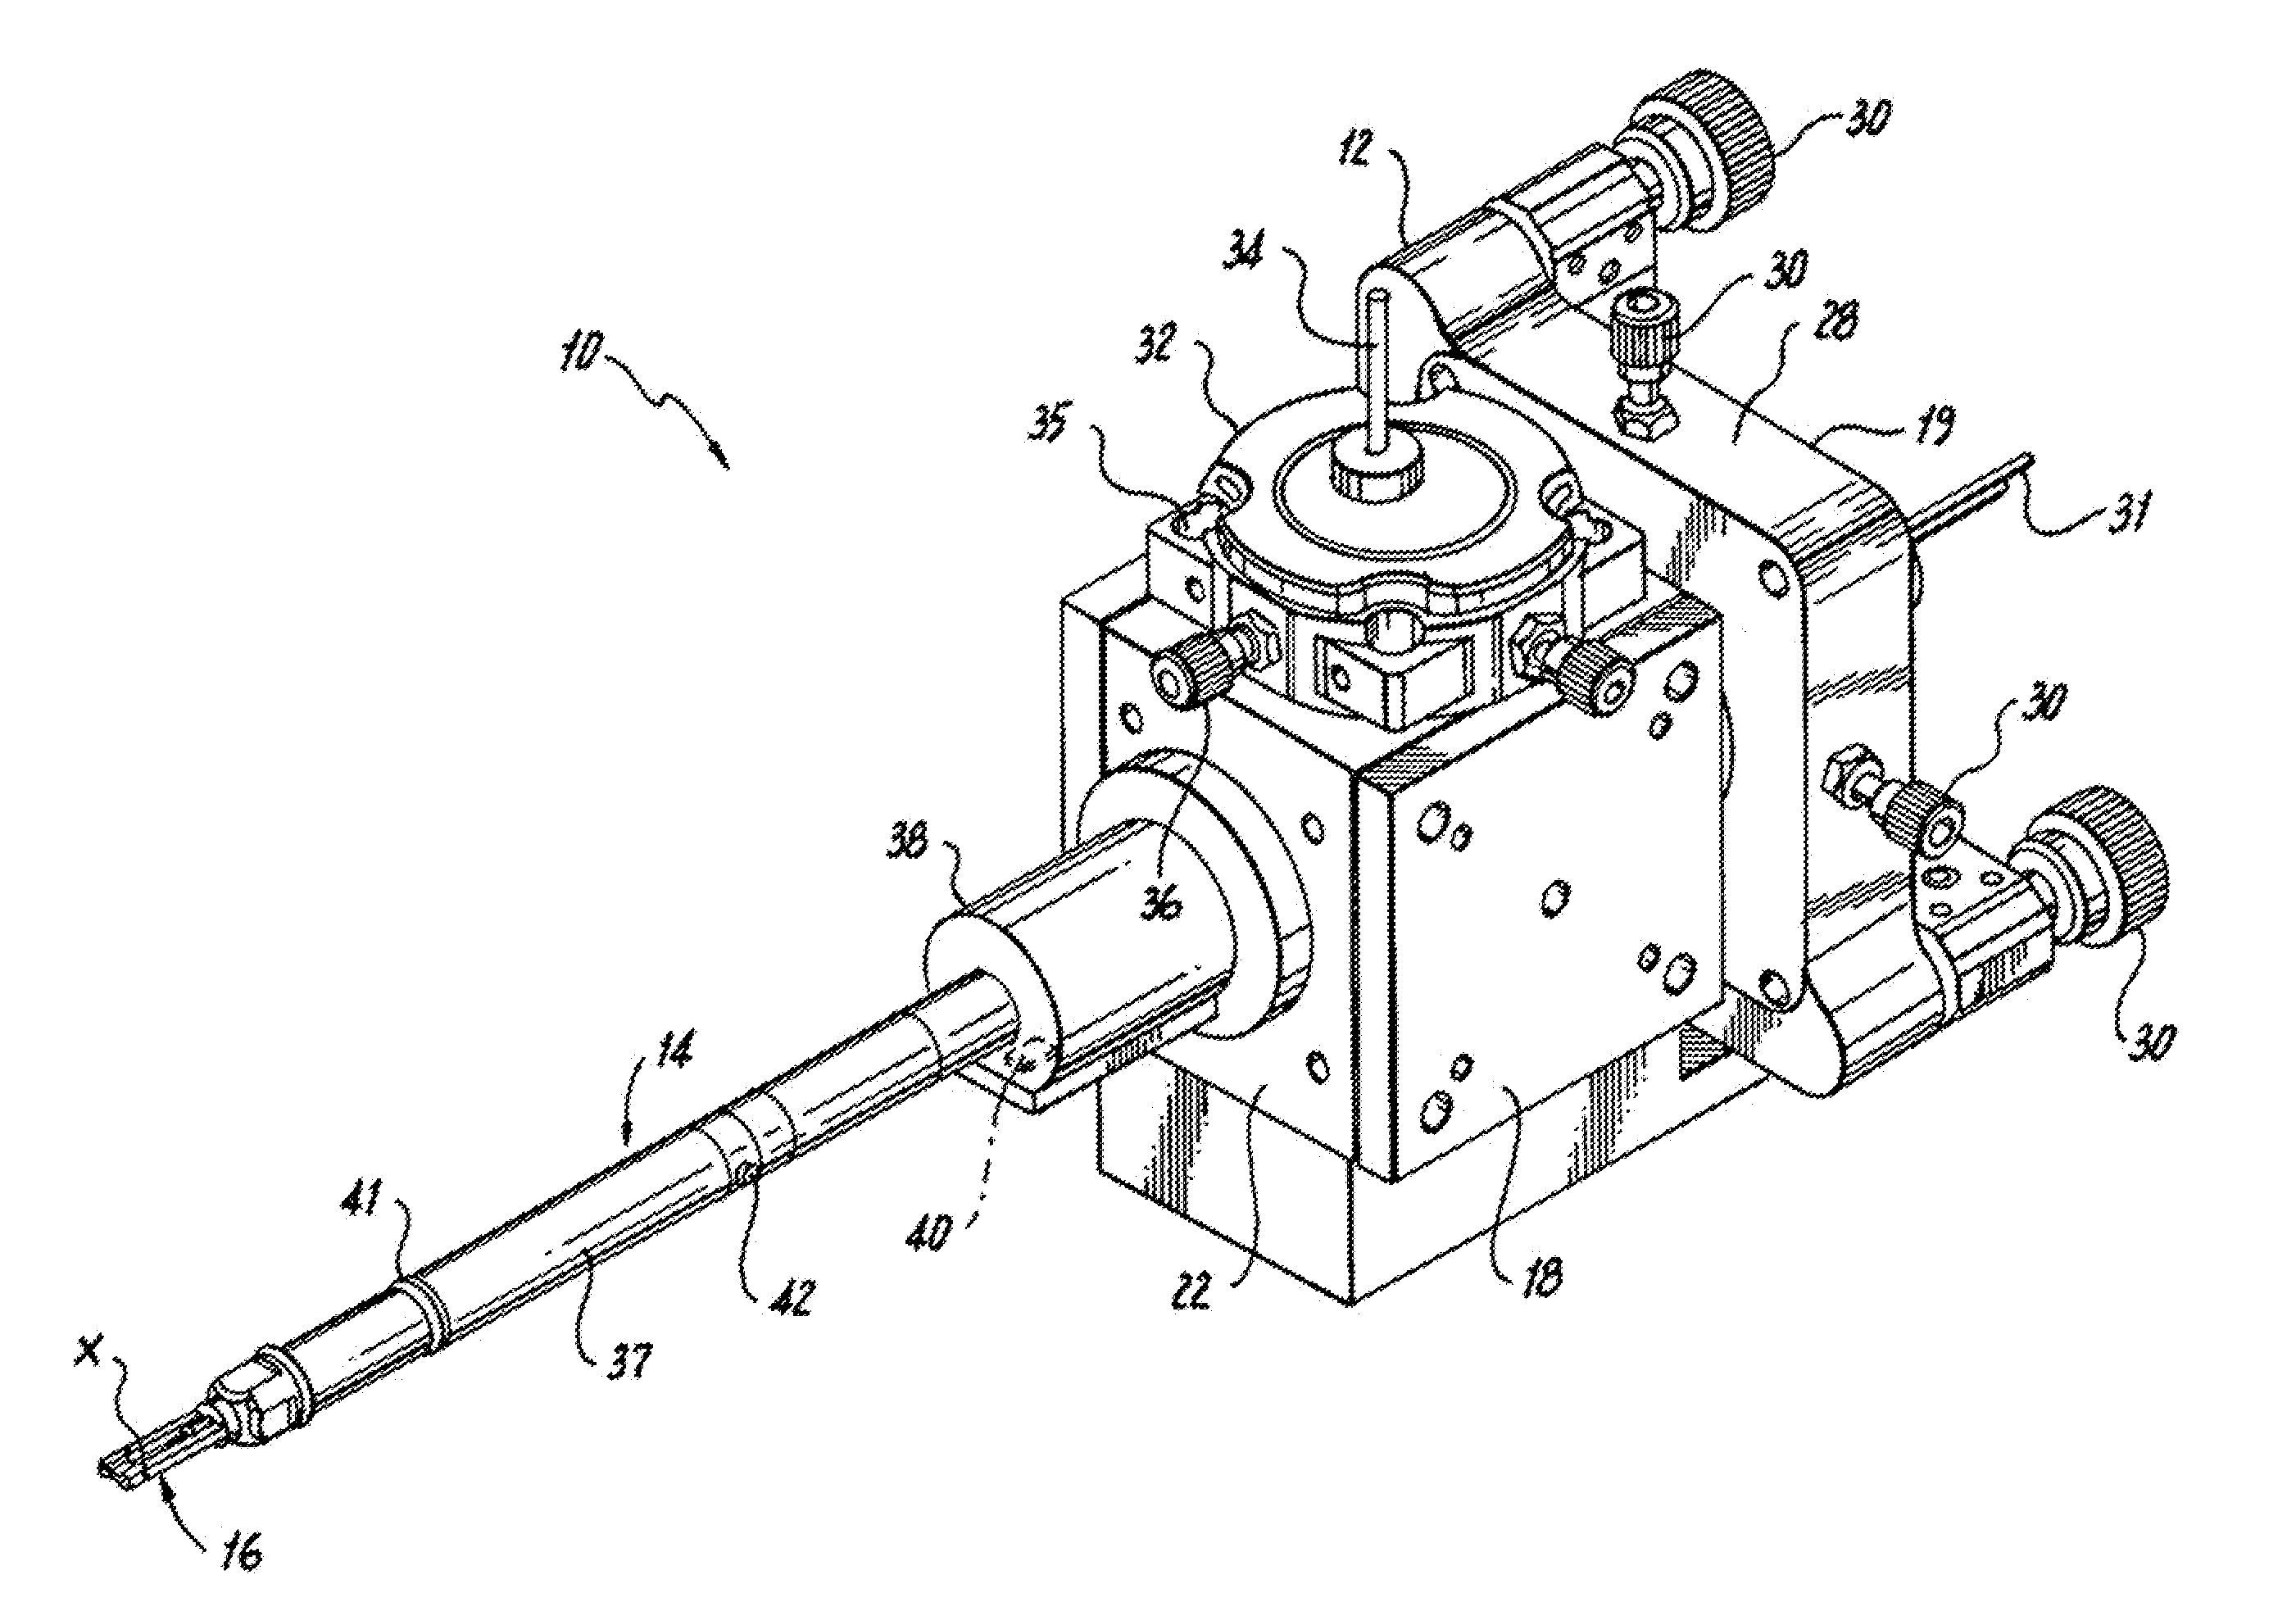 Sample Holder with Optical Features for Holding a Sample in an Analytical Device for Research Purposes